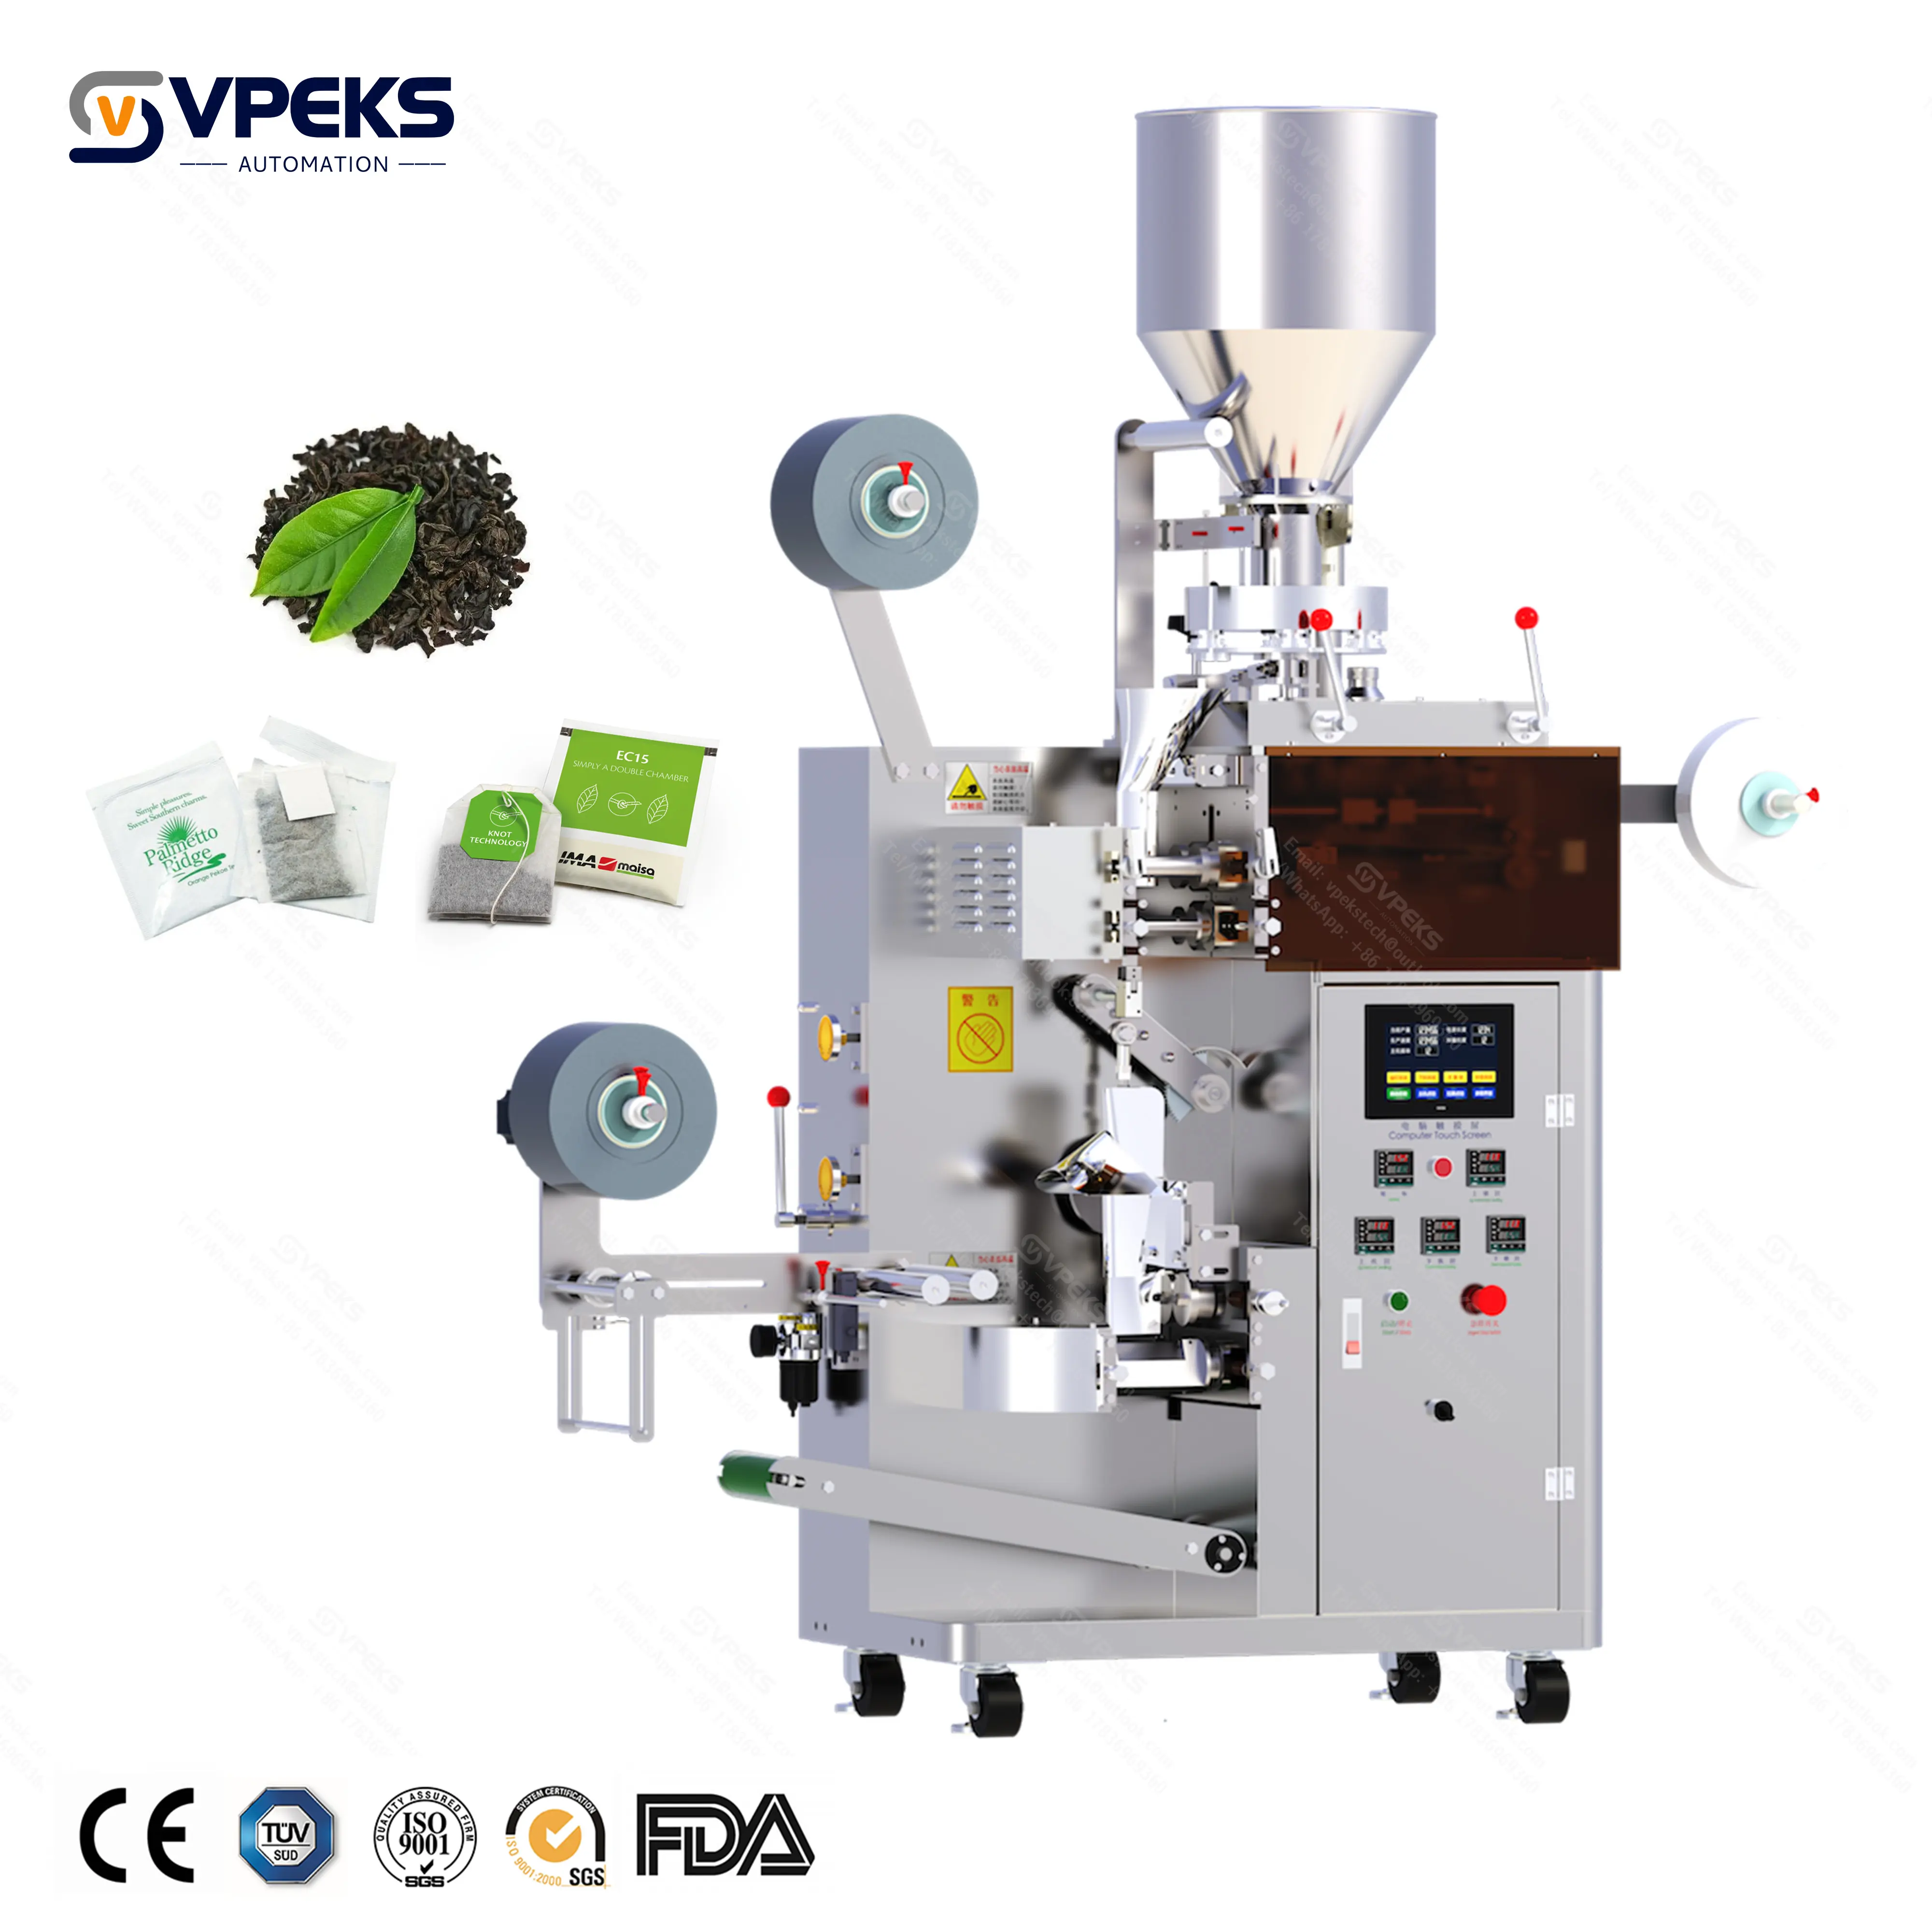 VPEKS High-Quality Double Chamber Tea Bag Packing Machine, Perfect for Inner and Outer Bag Packaging